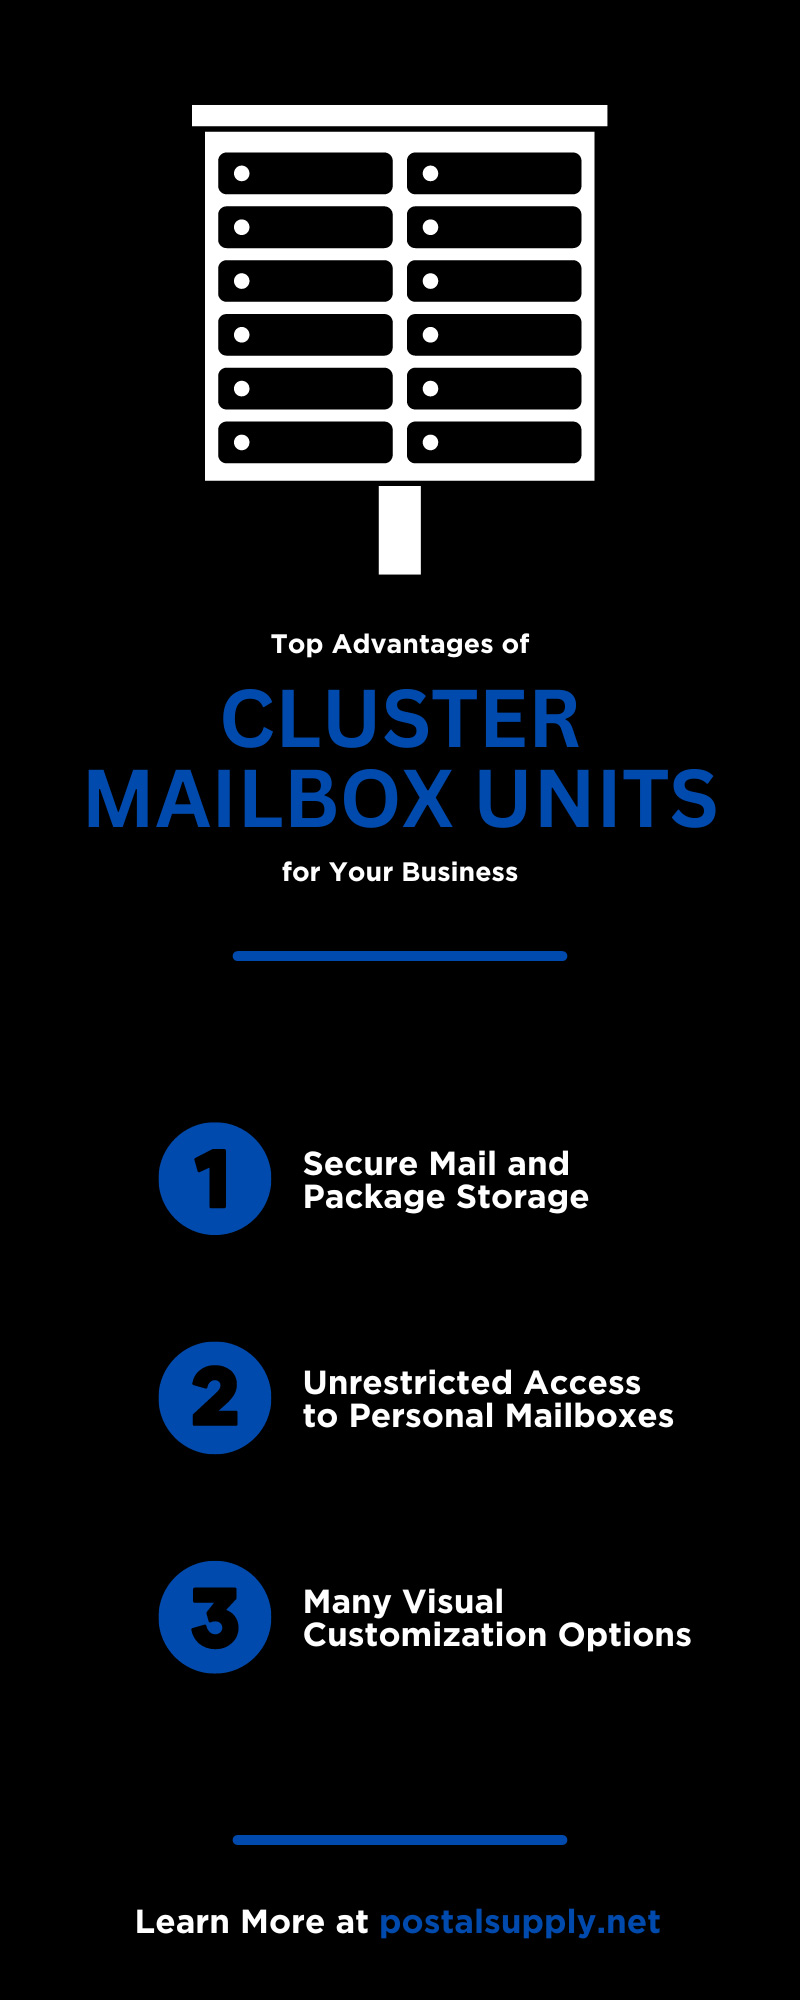 Top Advantages of Cluster Mailbox Units for Your Business
